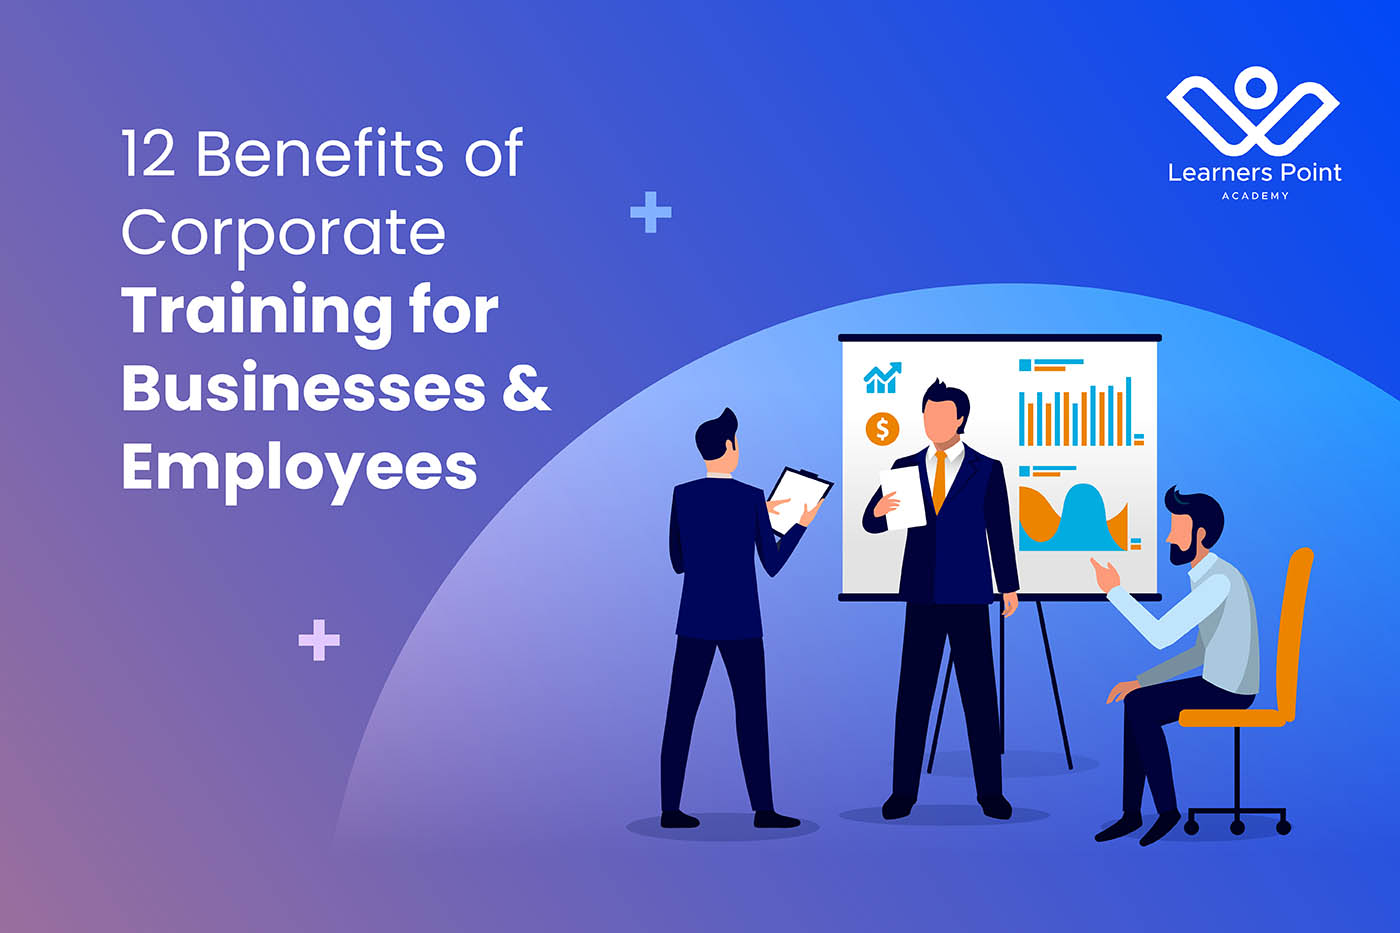 12 Benefits of Corporate Training for Businesses & Employees